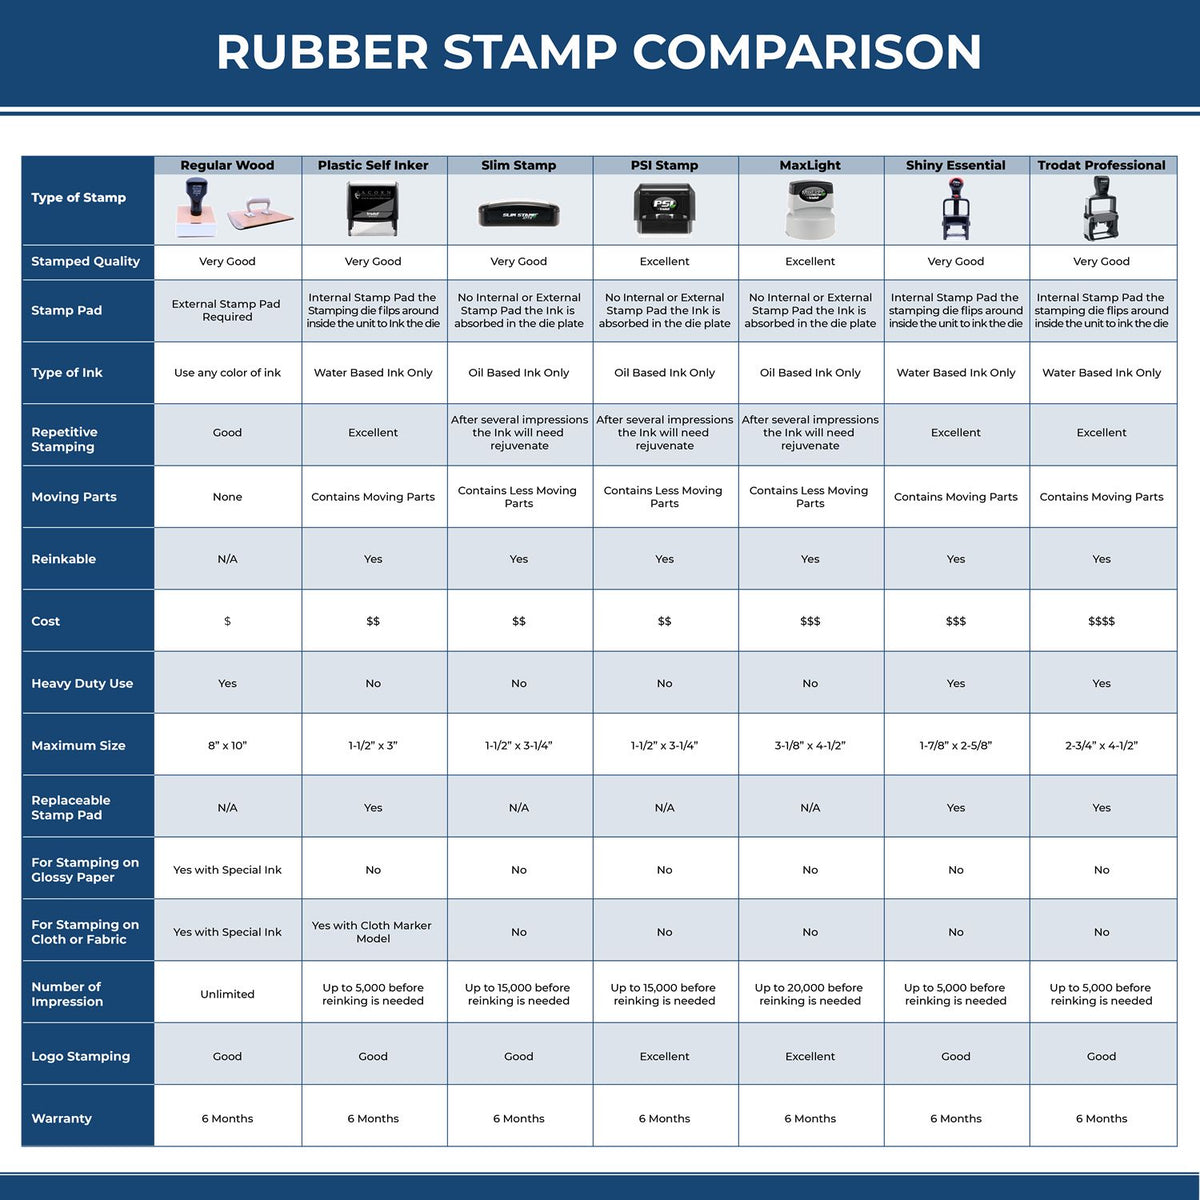 Large Self-Inking Additional Postage Required Stamp 4873S Rubber Stamp Comparison